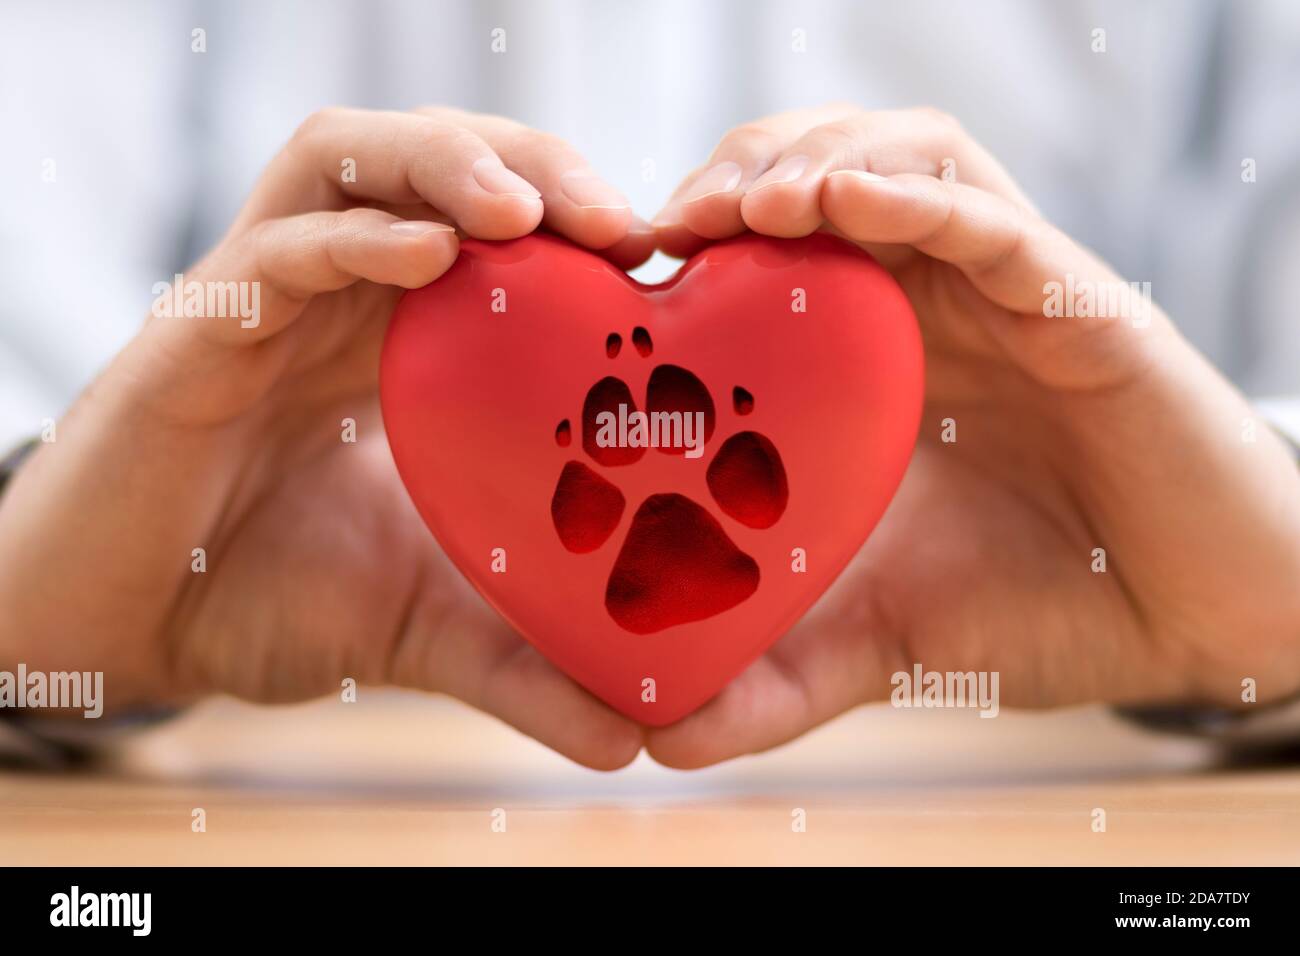 Red heart with dog paw print in hands Stock Photo